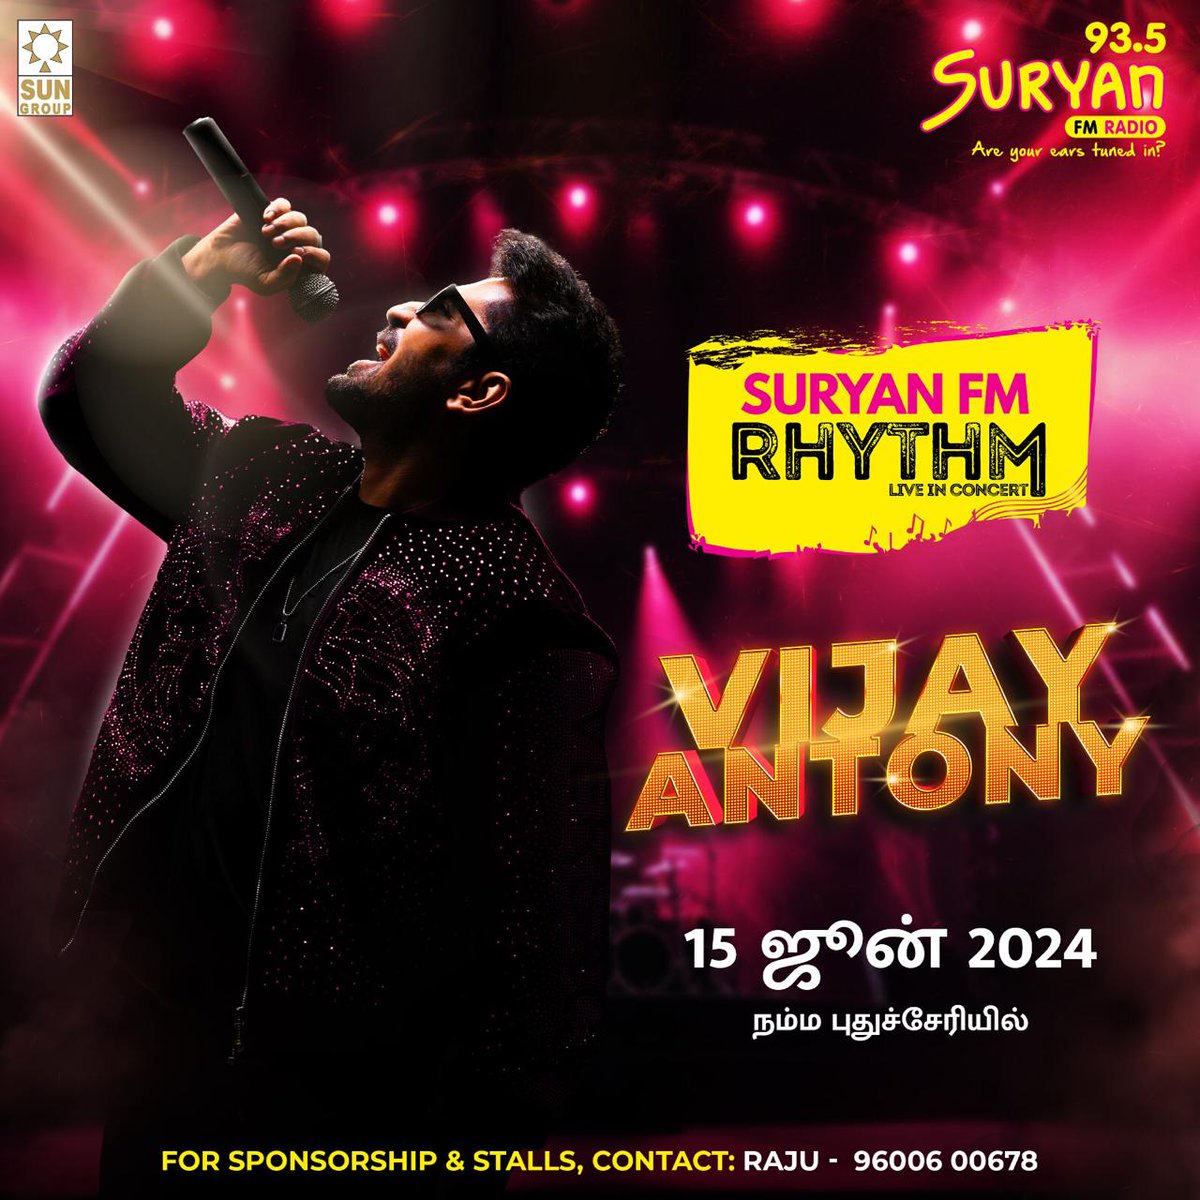 Pondy Makkaley be ready to vibe with the one and only #VijayAntony 🔥🎤

SURYAN FM RHYTHM LIVE IN CONCERT WITH VIJAY ANTONY on 15th June 2024

@SuryanFM @vijayantony @onlynikil

#SuryanFM #Rhythm #SuryanFMRhythm #VijayAntonysongs #VijayAntonyConcert ❤️🔥